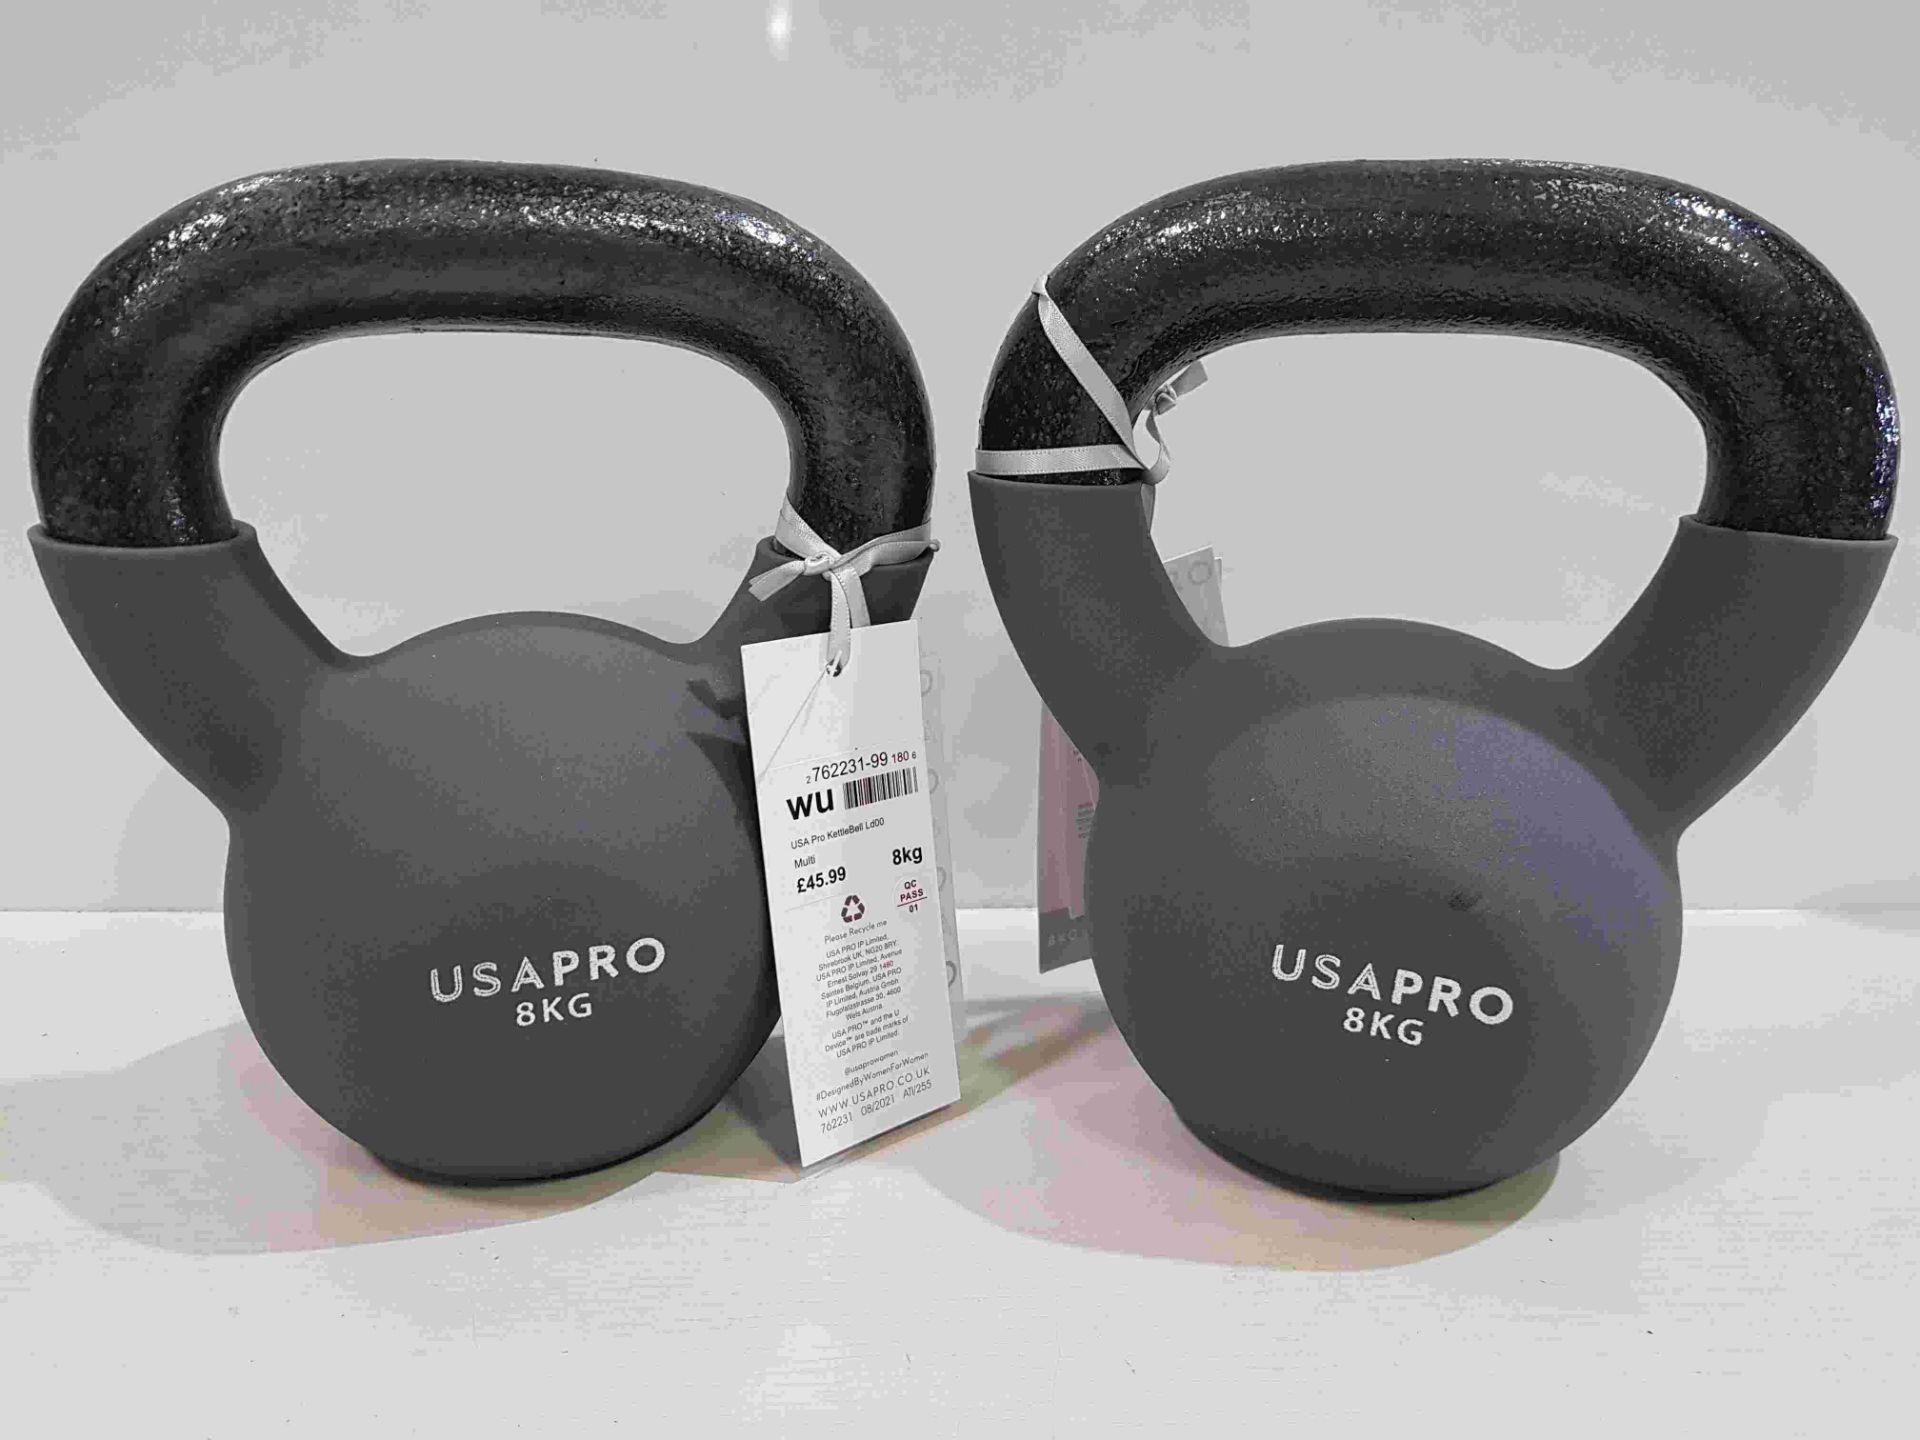 20 X BRAND NEW USA PRO 8 KG KETTLEBELLS ( 10 PAIRS ) - RRP £ 45.99PP - £ TOTAL RRP £ 919.80 - ALL